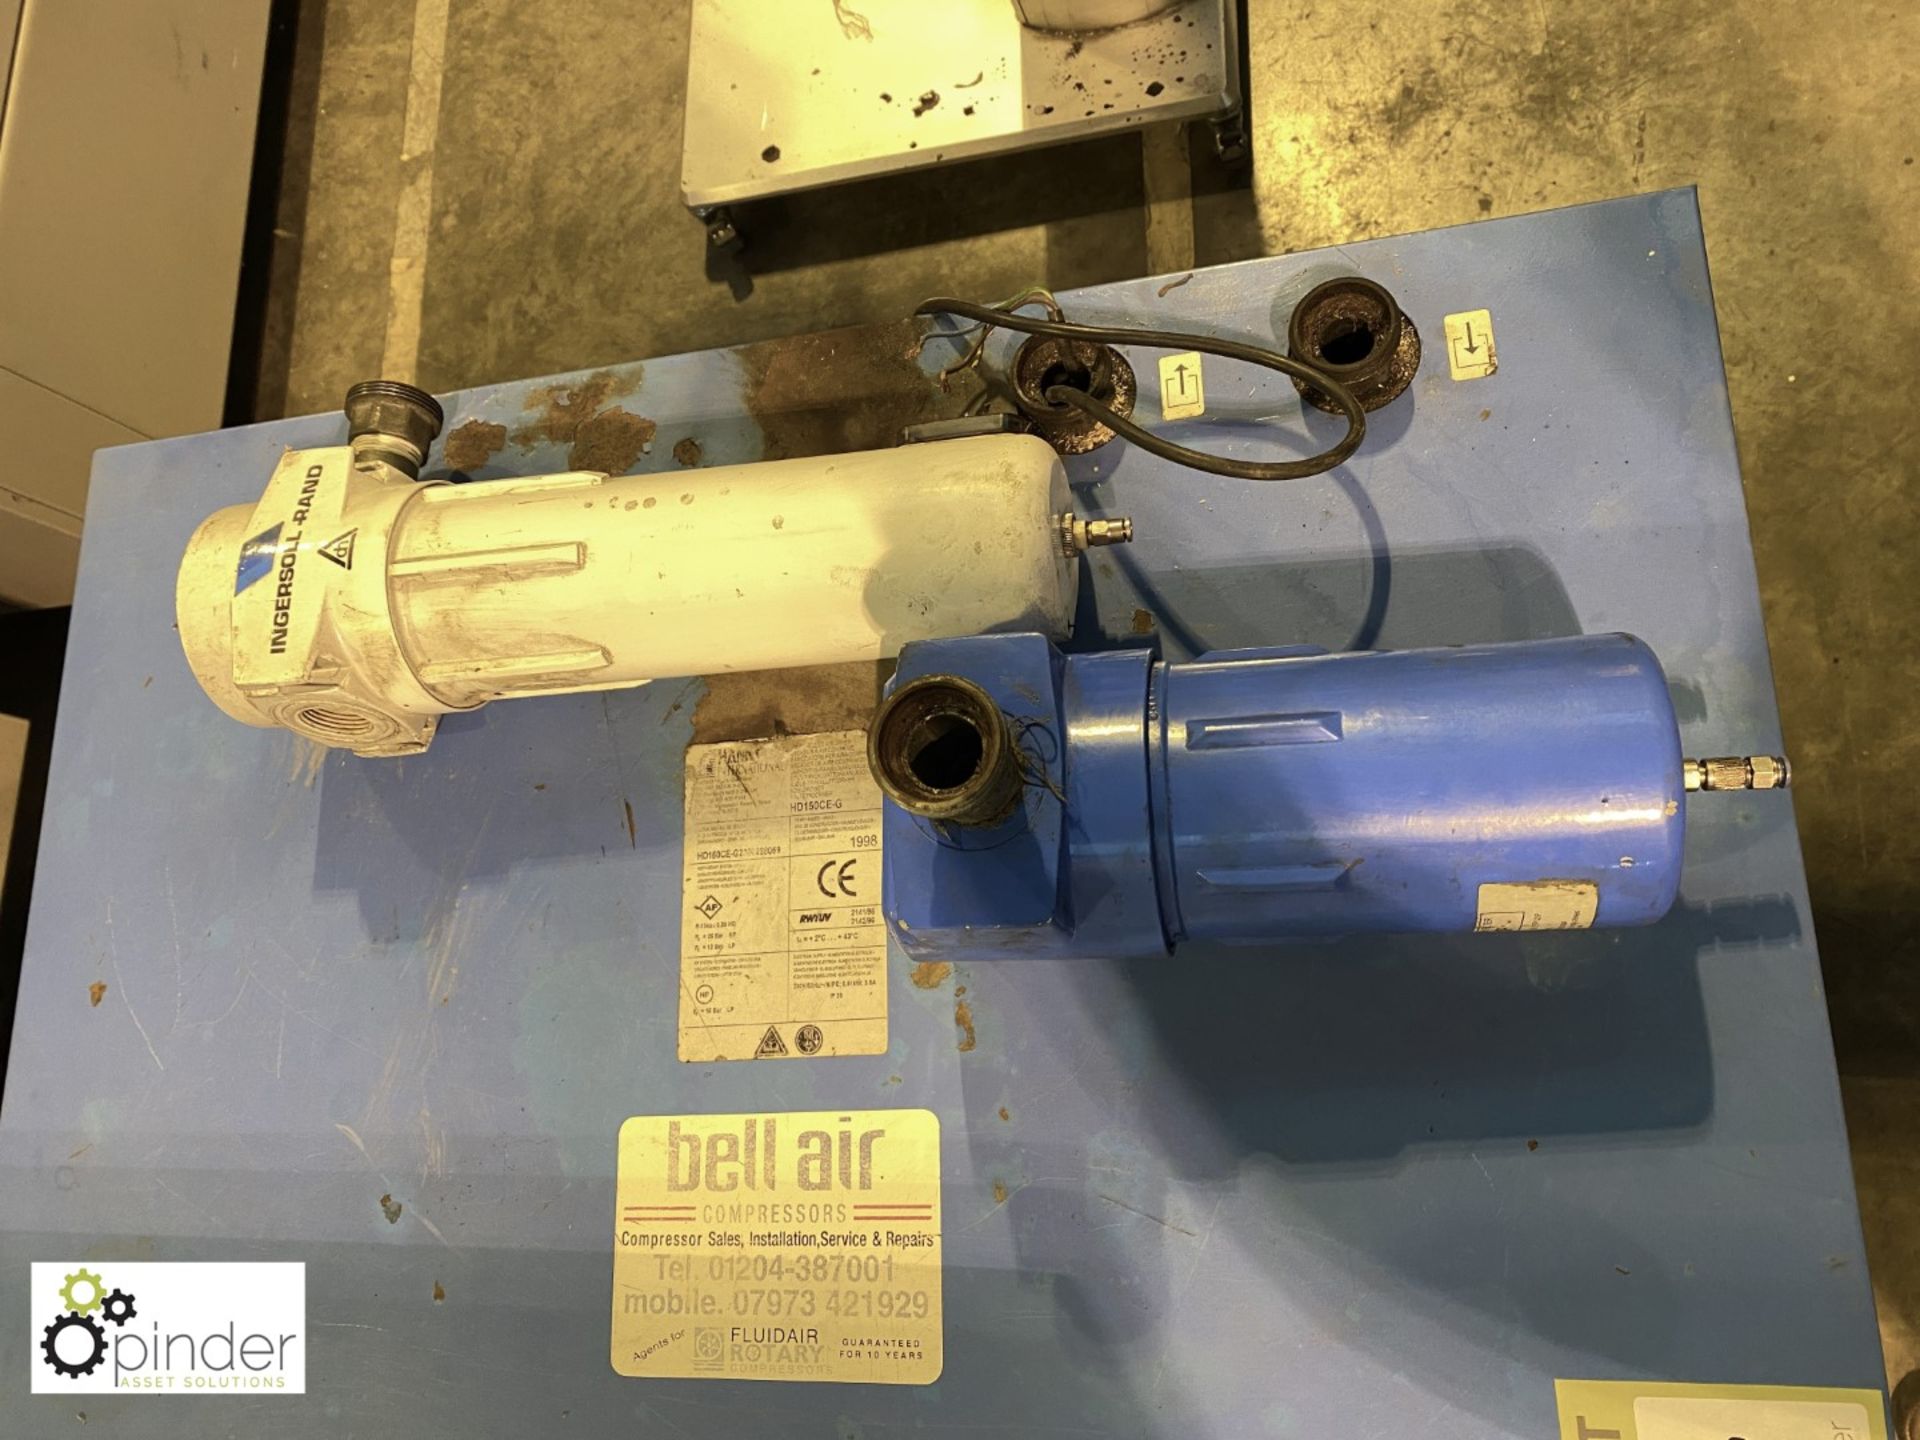 Fluidair HD150 CE-G Compressed Air Dryer, year 1998, with 2 air filters - Image 3 of 4